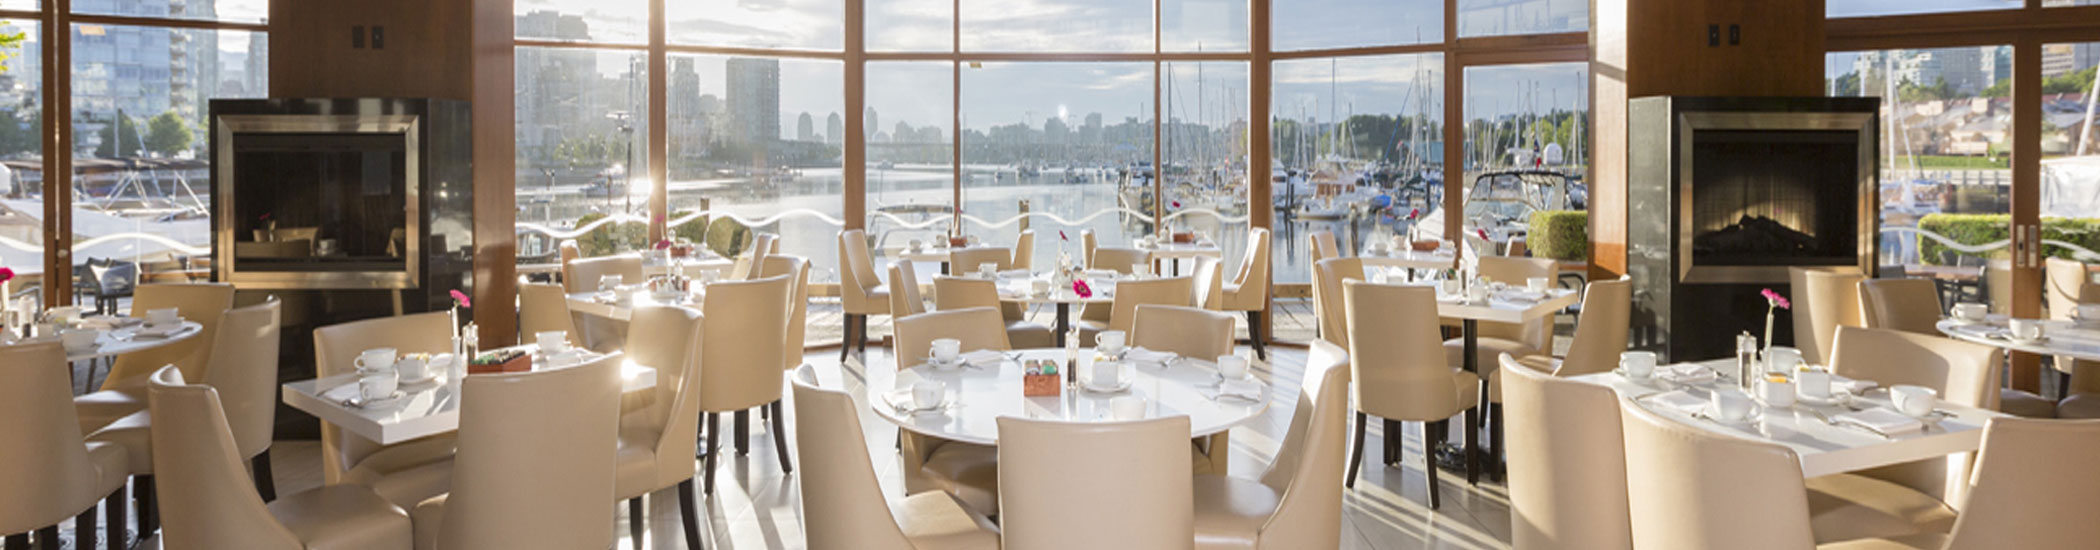 Photo of Dockside Restaurant's dining room, with large windows showcasing Vancouver views of tall buildings and the water.